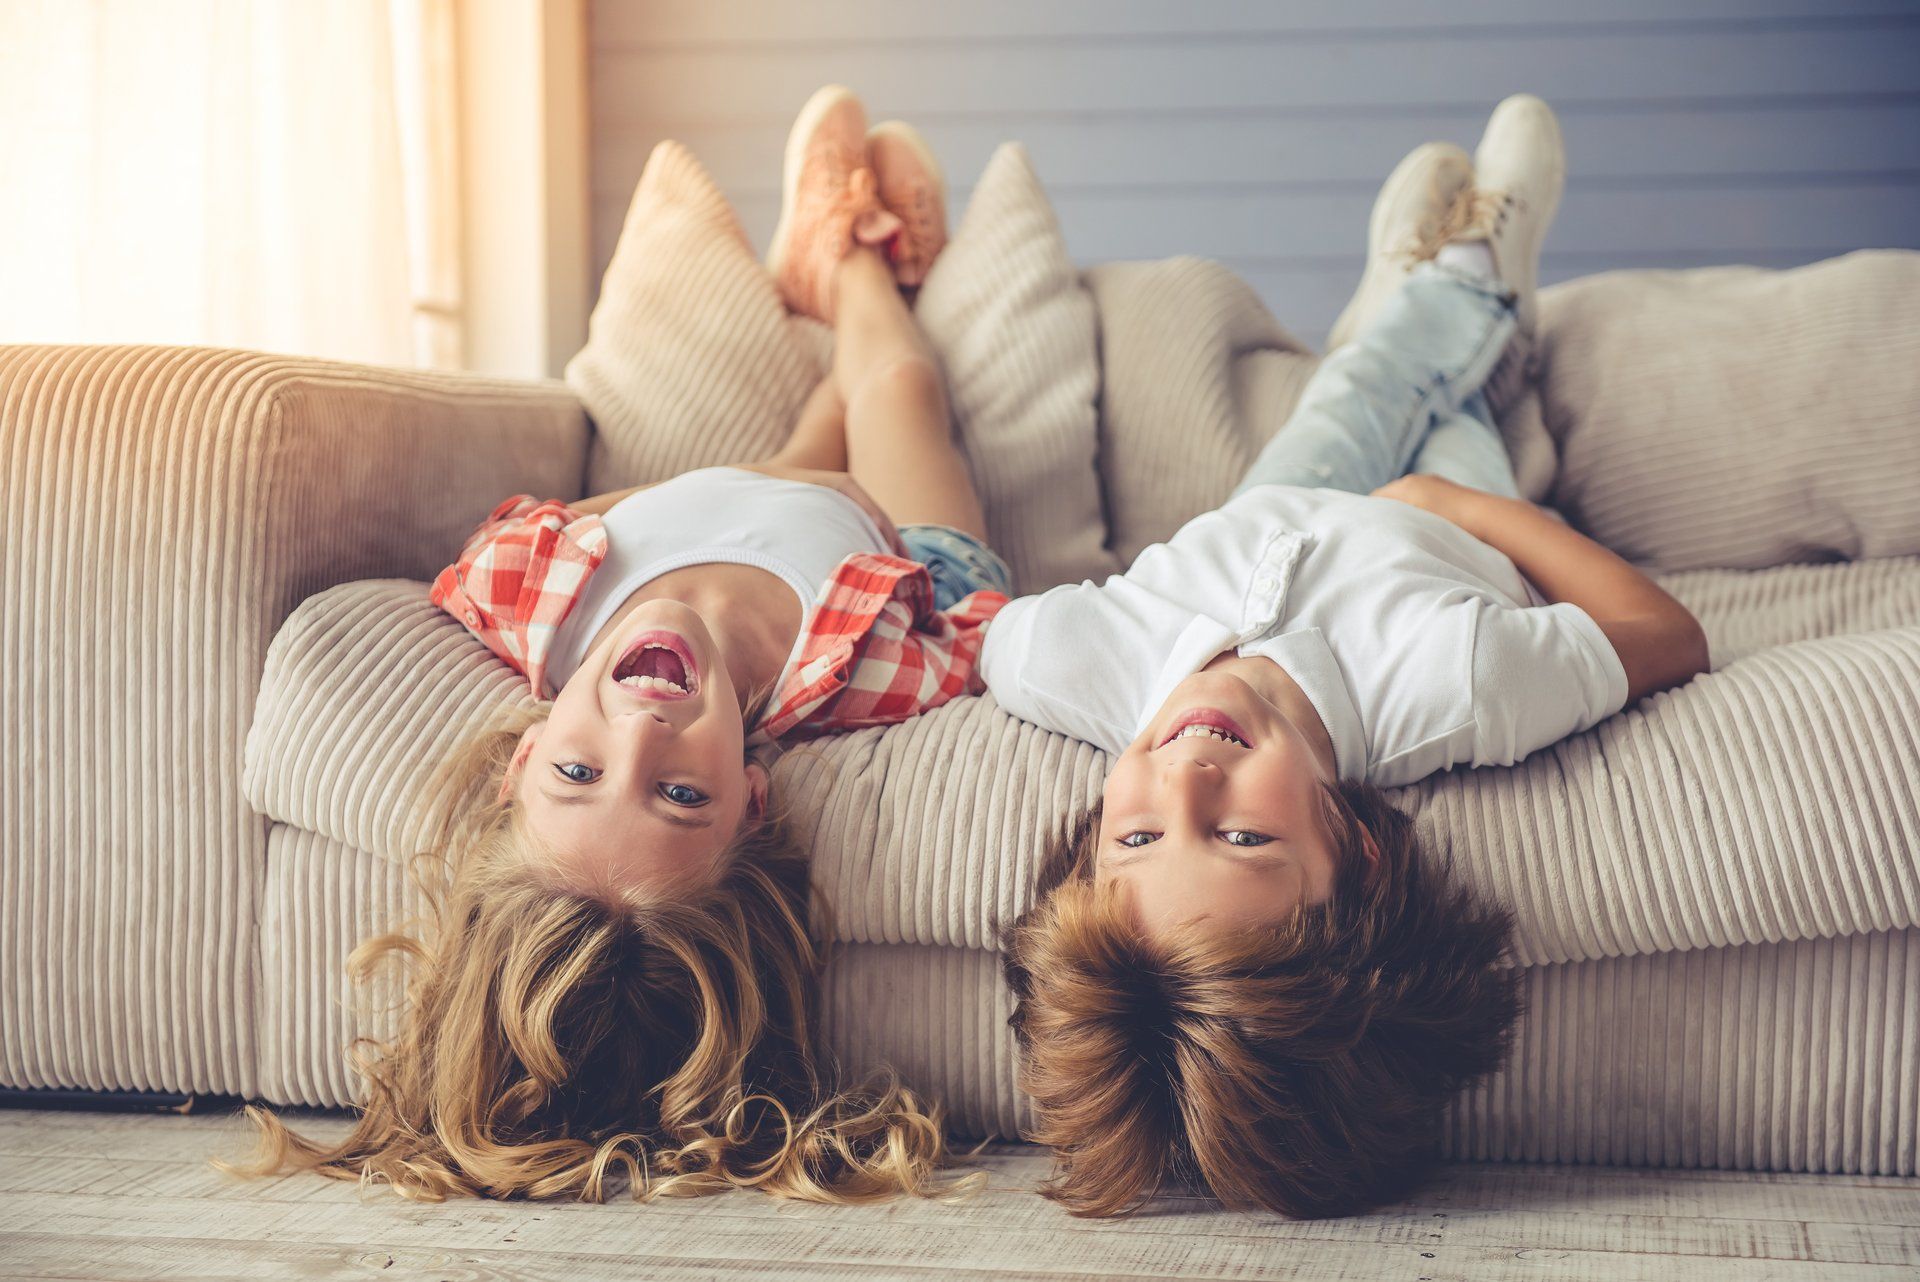 A girl and boy lying upside down on the couch